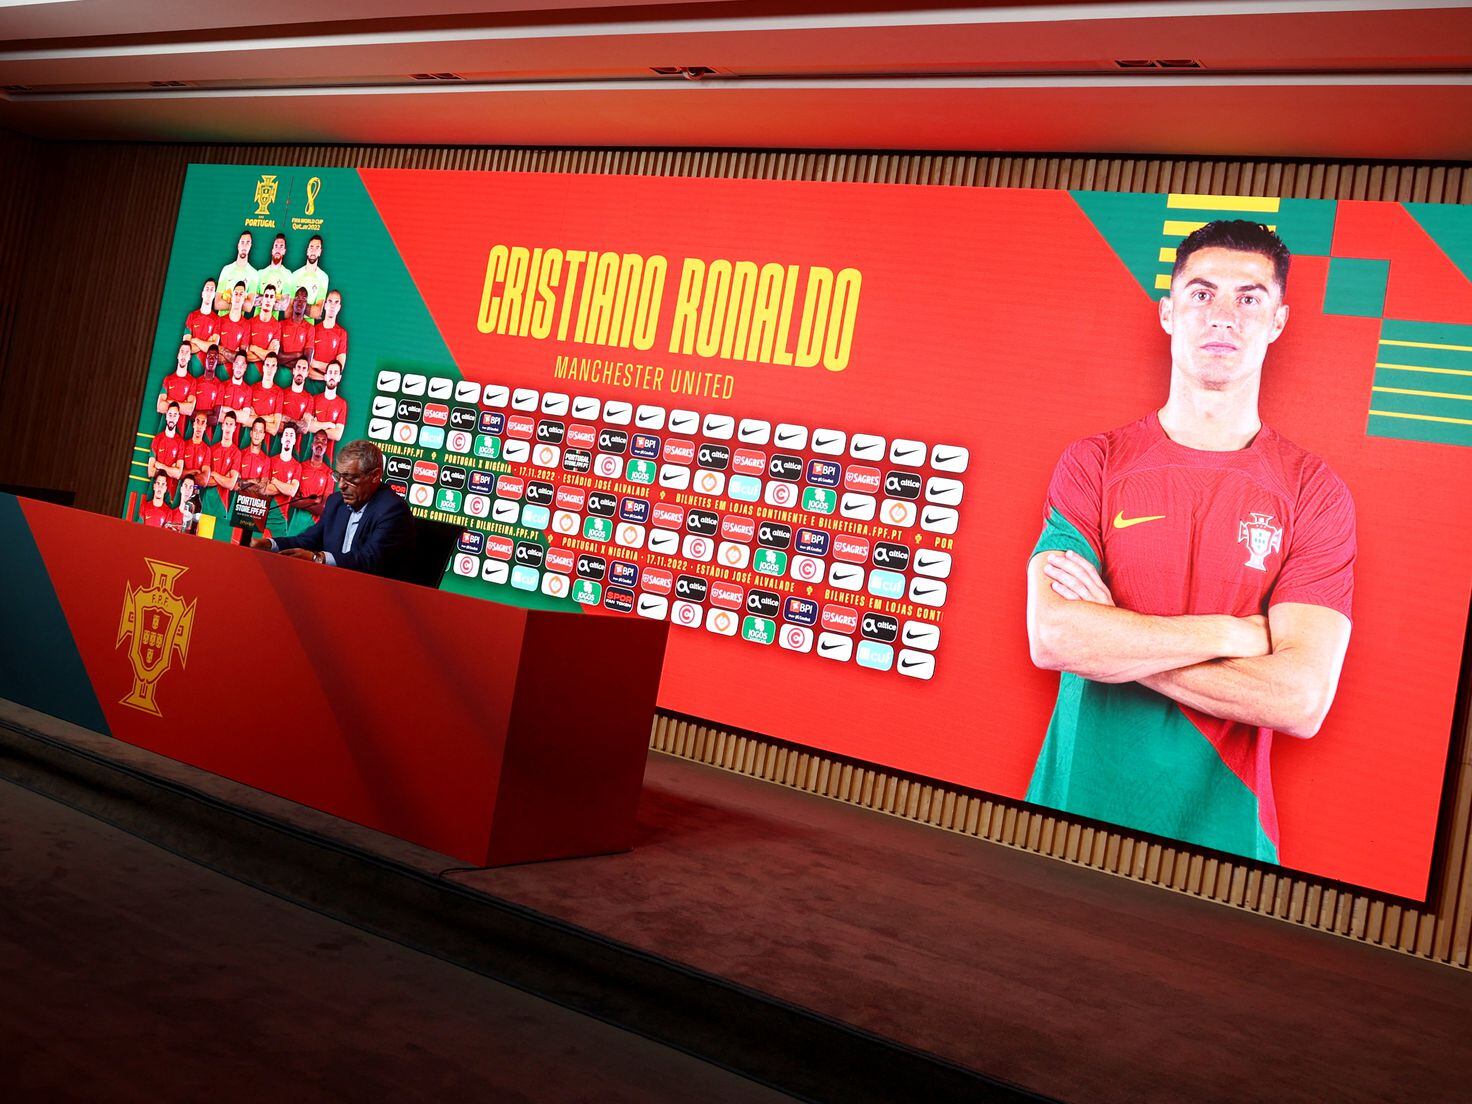 Ronaldo & Bruno Fernandes out, Leao & Ramos in: How will Portugal line up  at the 2026 World Cup?